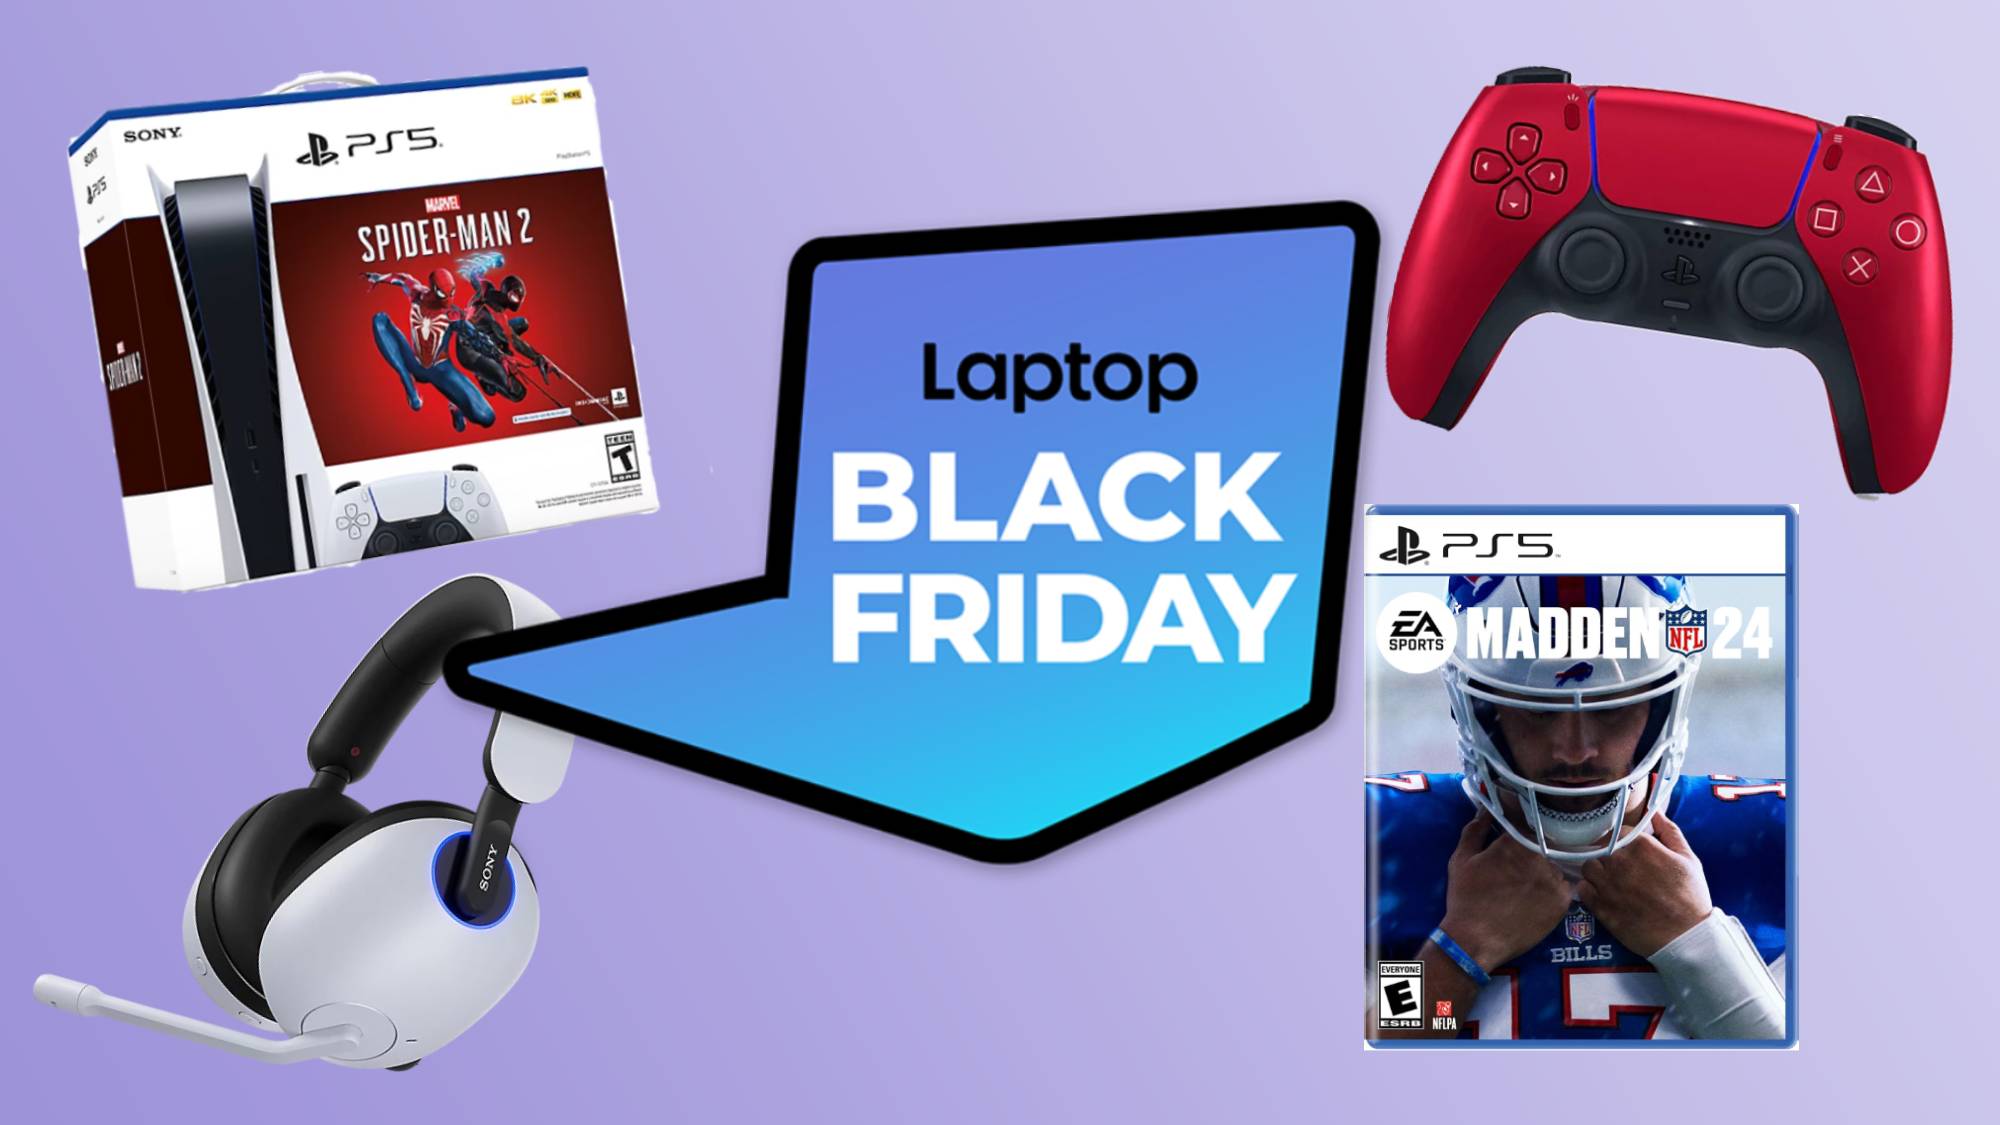 You don't have to wait to snag the best PS5 Black Friday deals